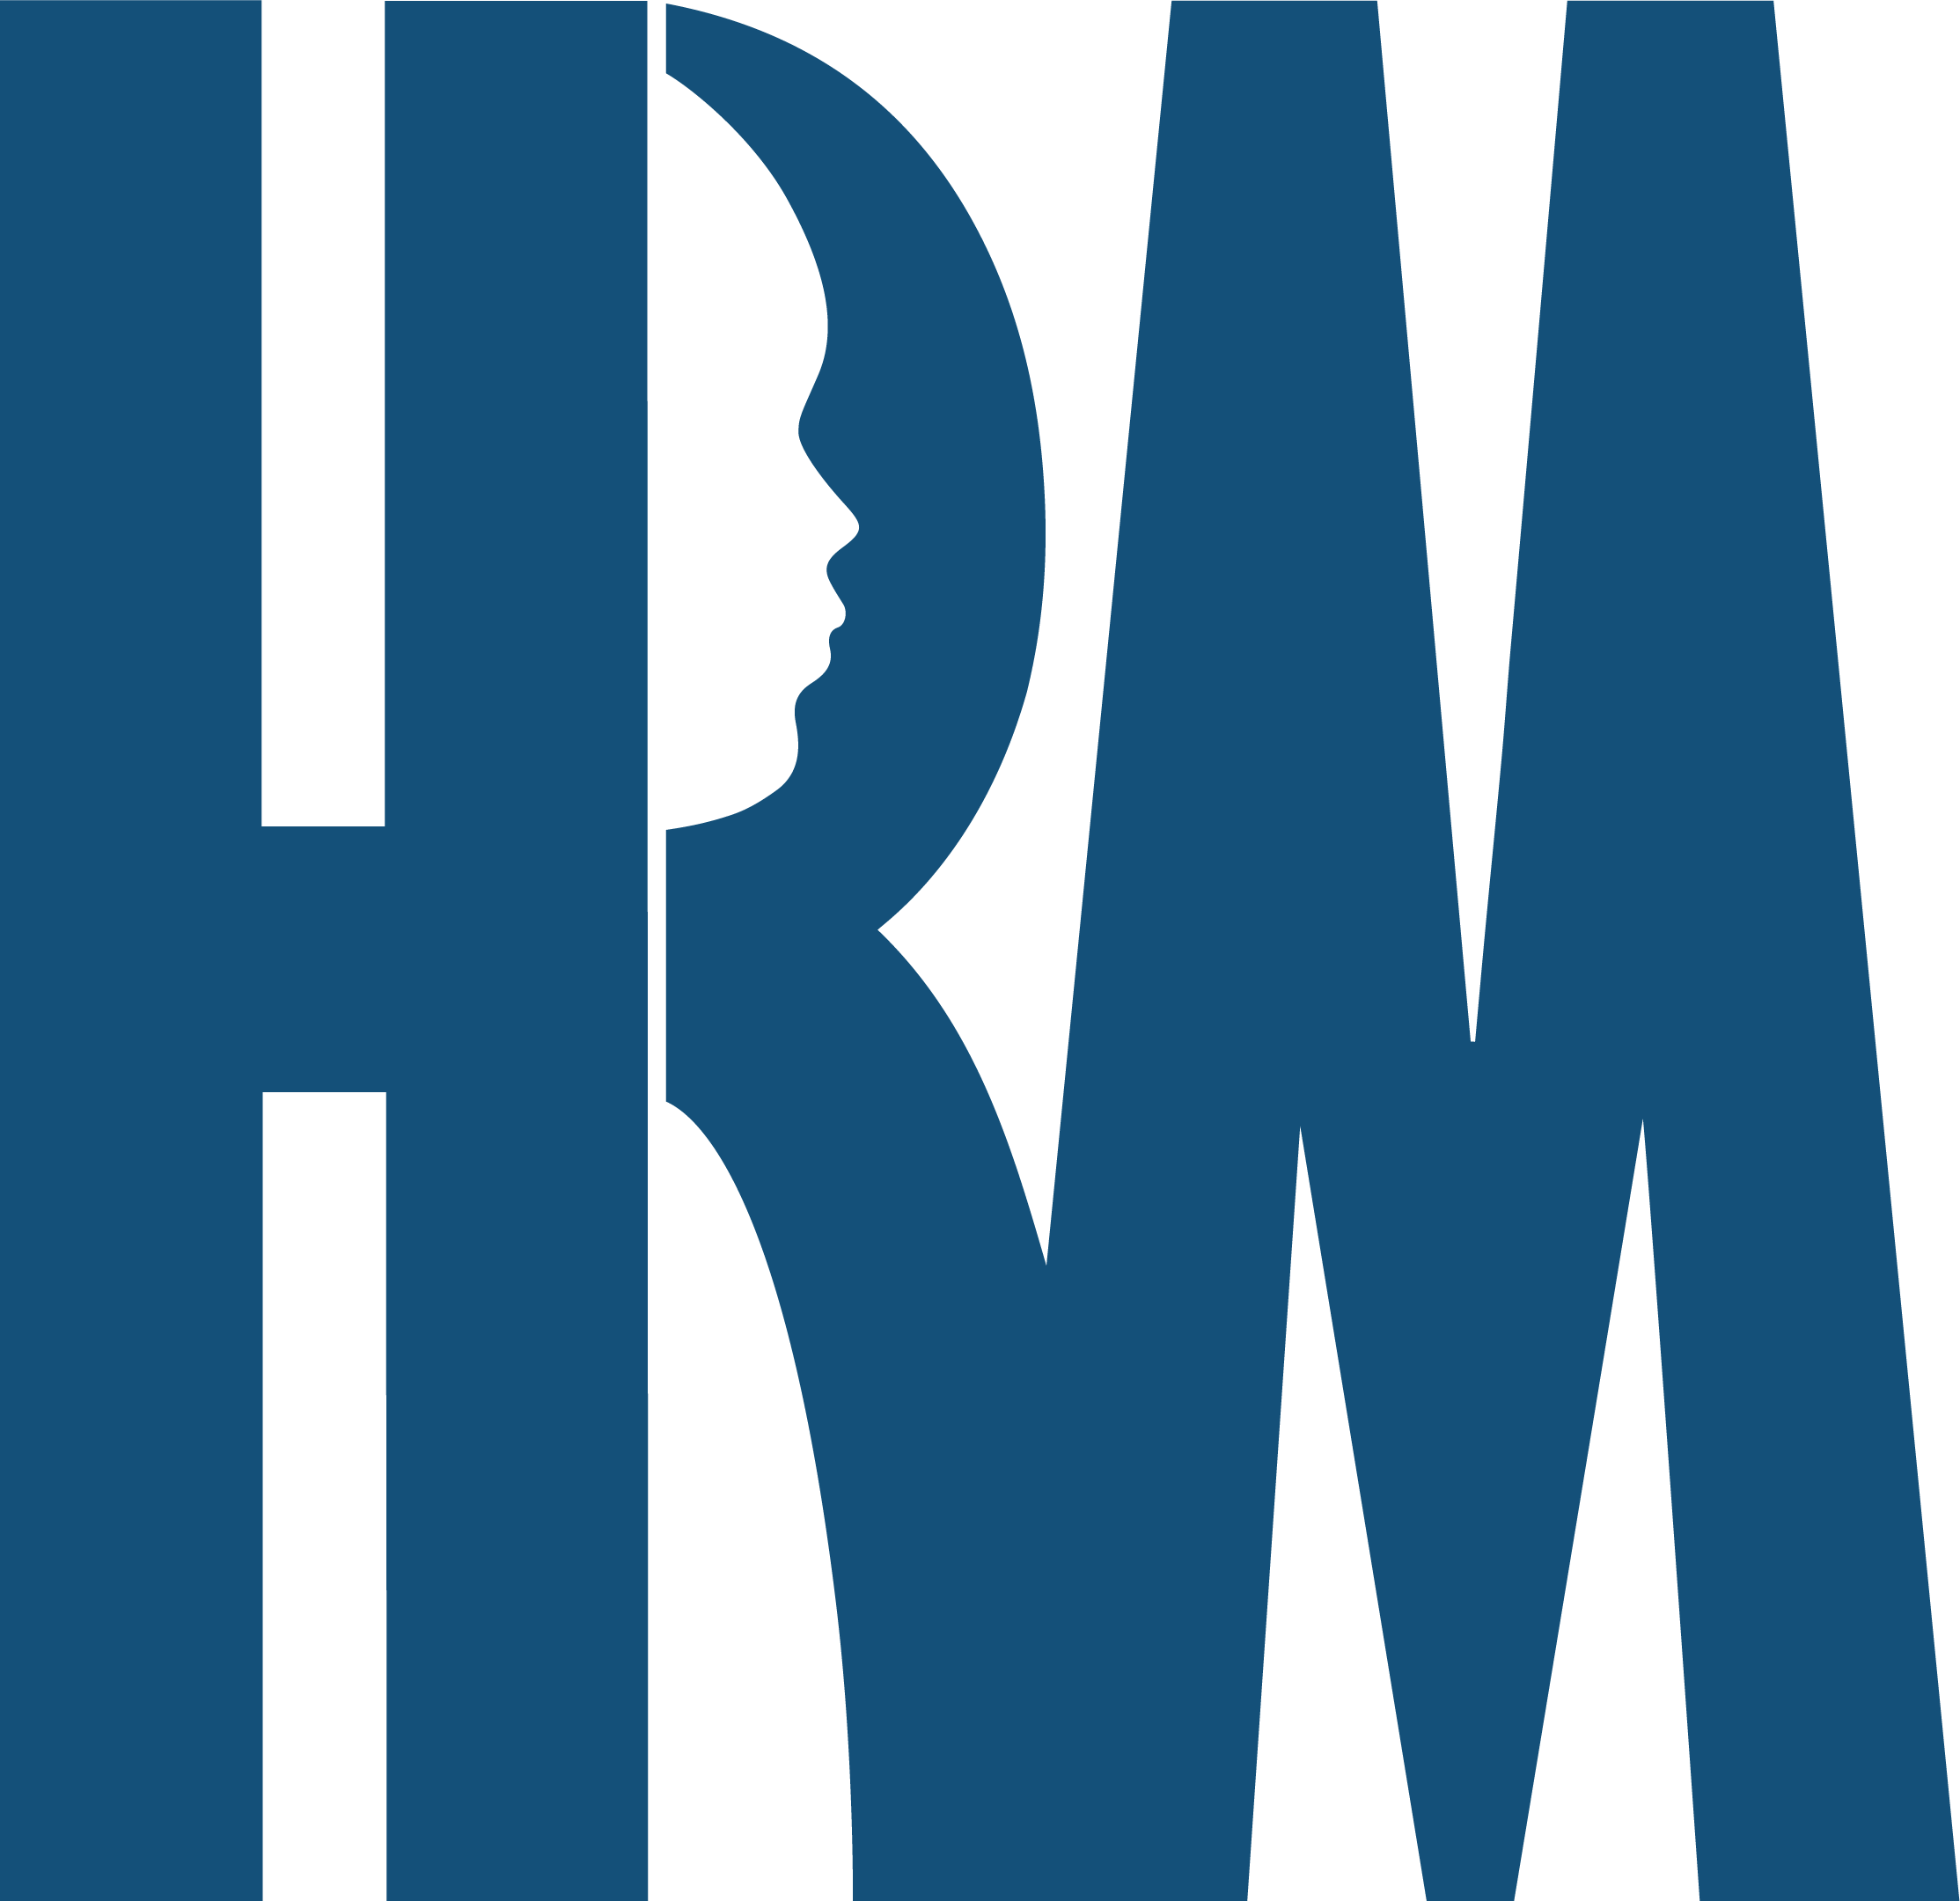 HRM Logo - HRM Contracting and Consulting Resources & Recruitment